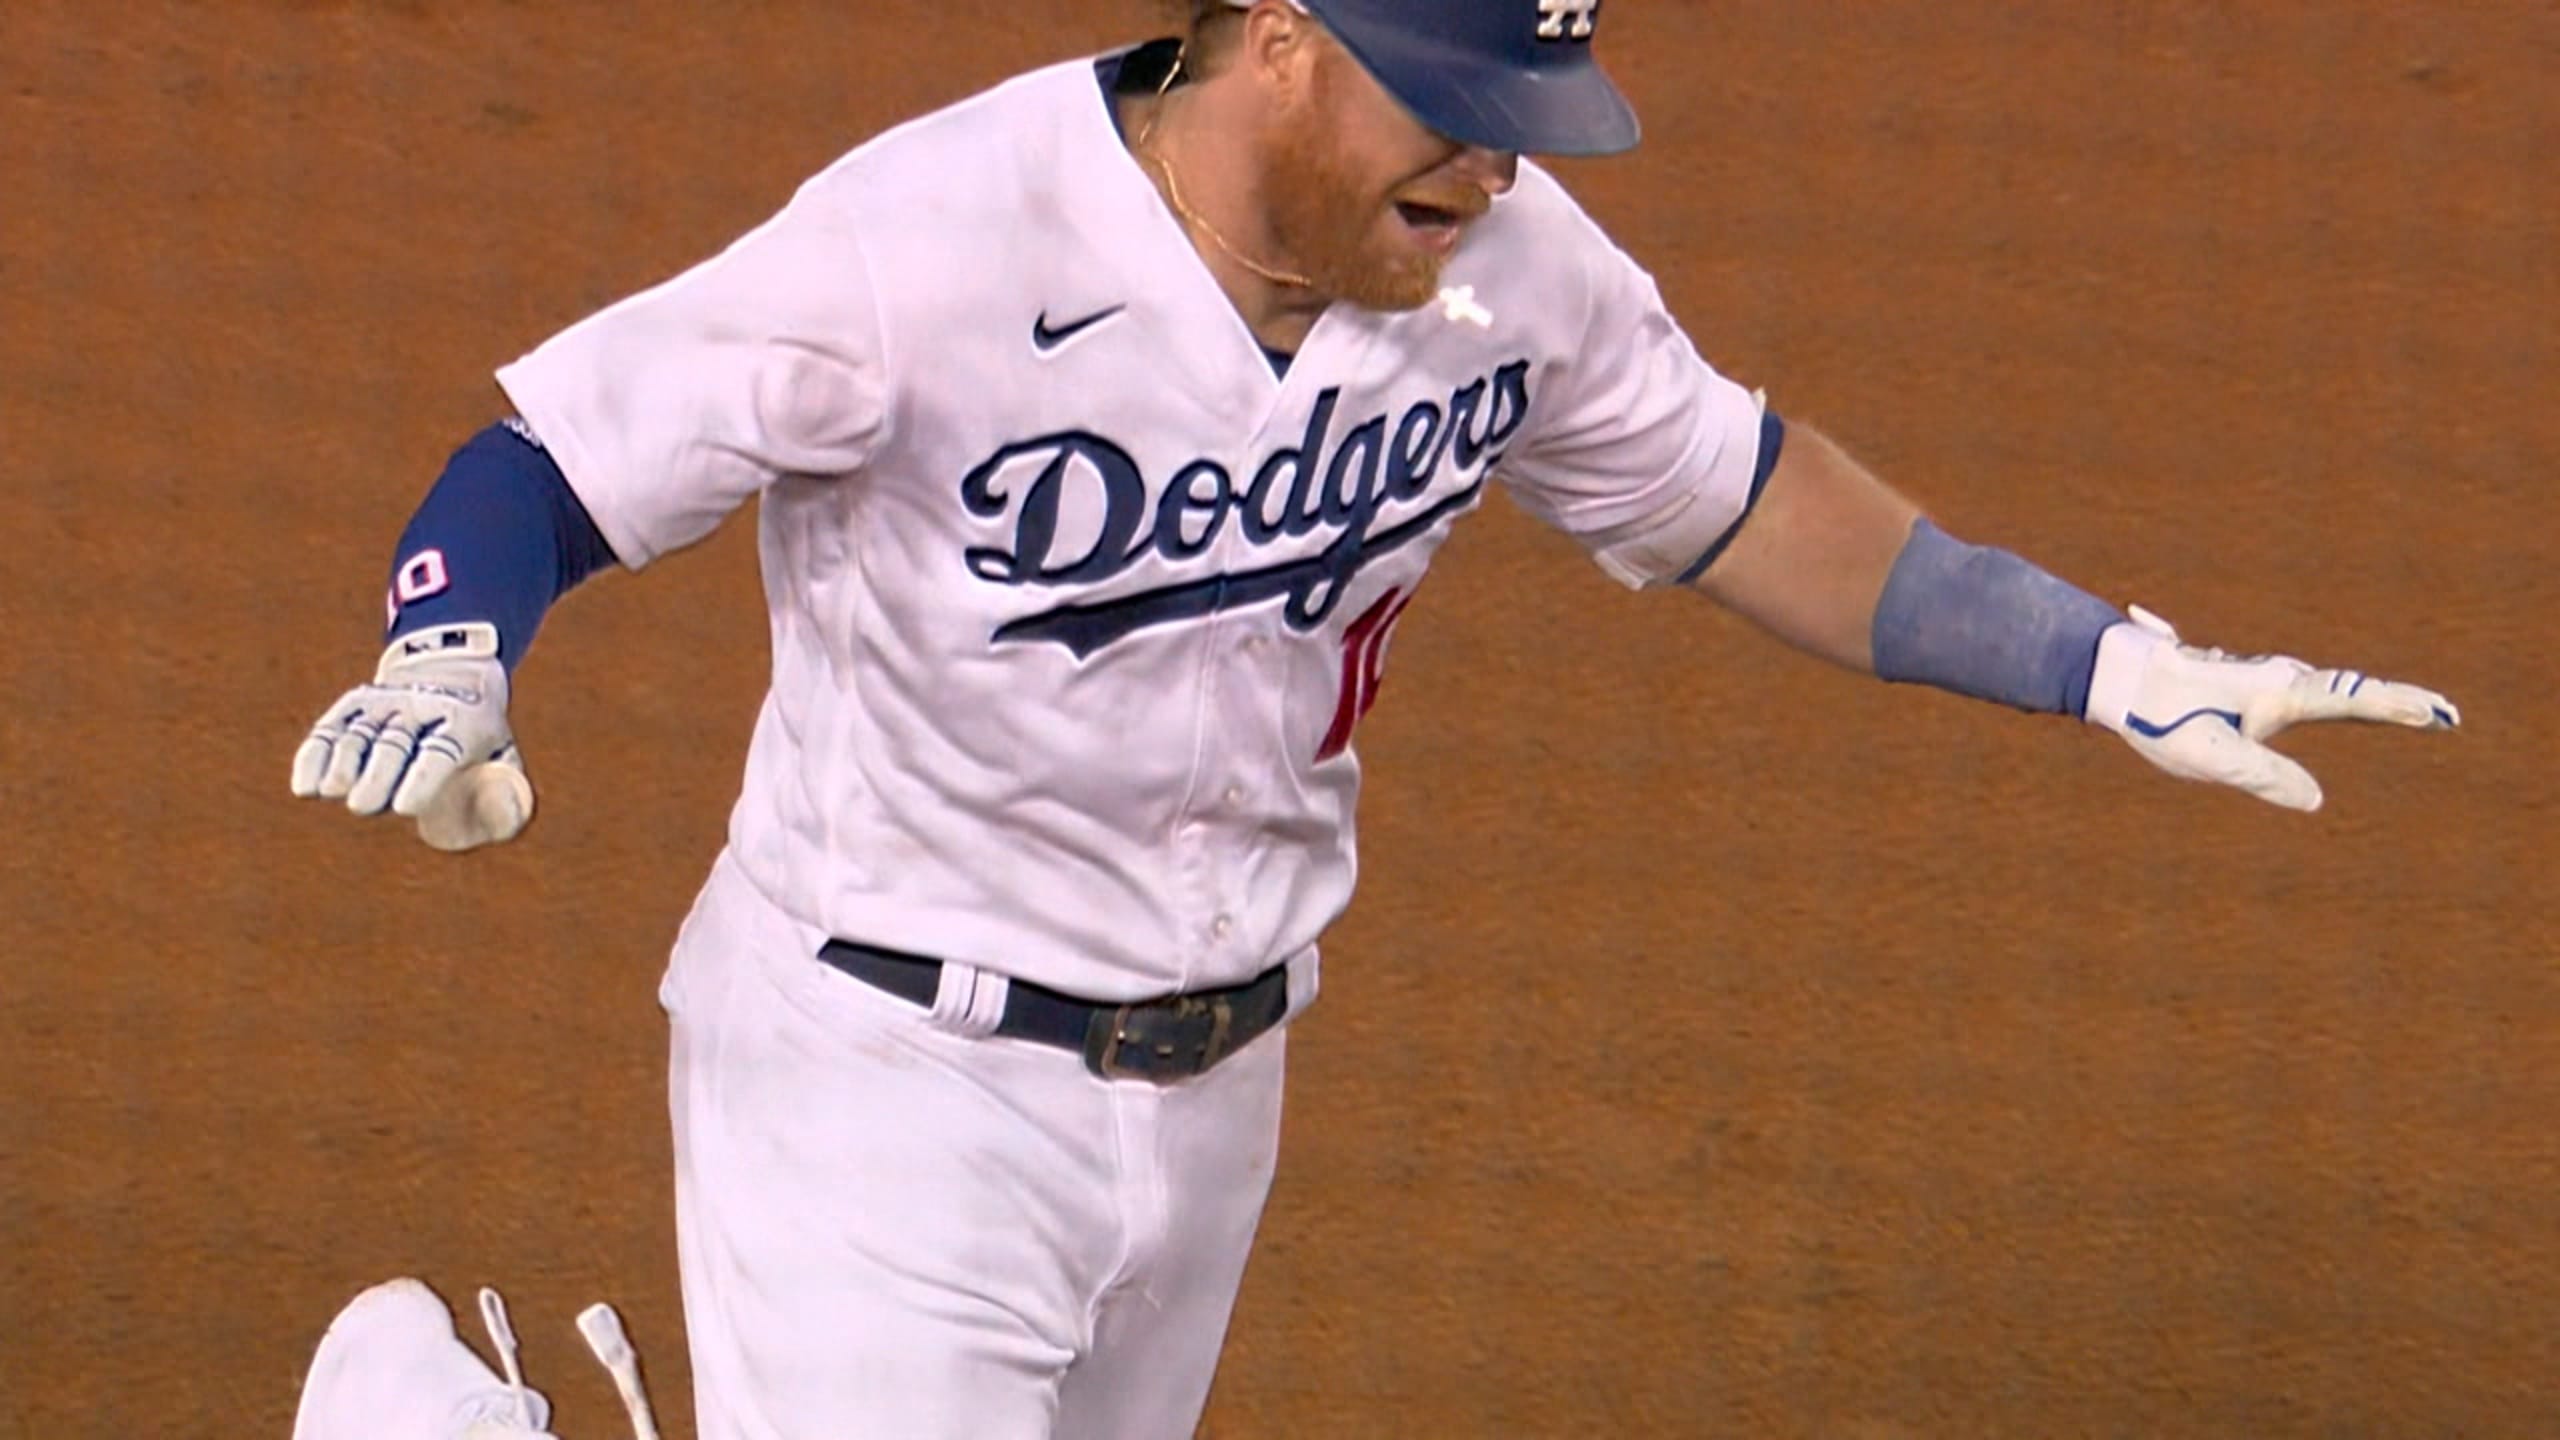 Max Muncy gets the better of Alex Wood this time to lift Dodgers past Giants